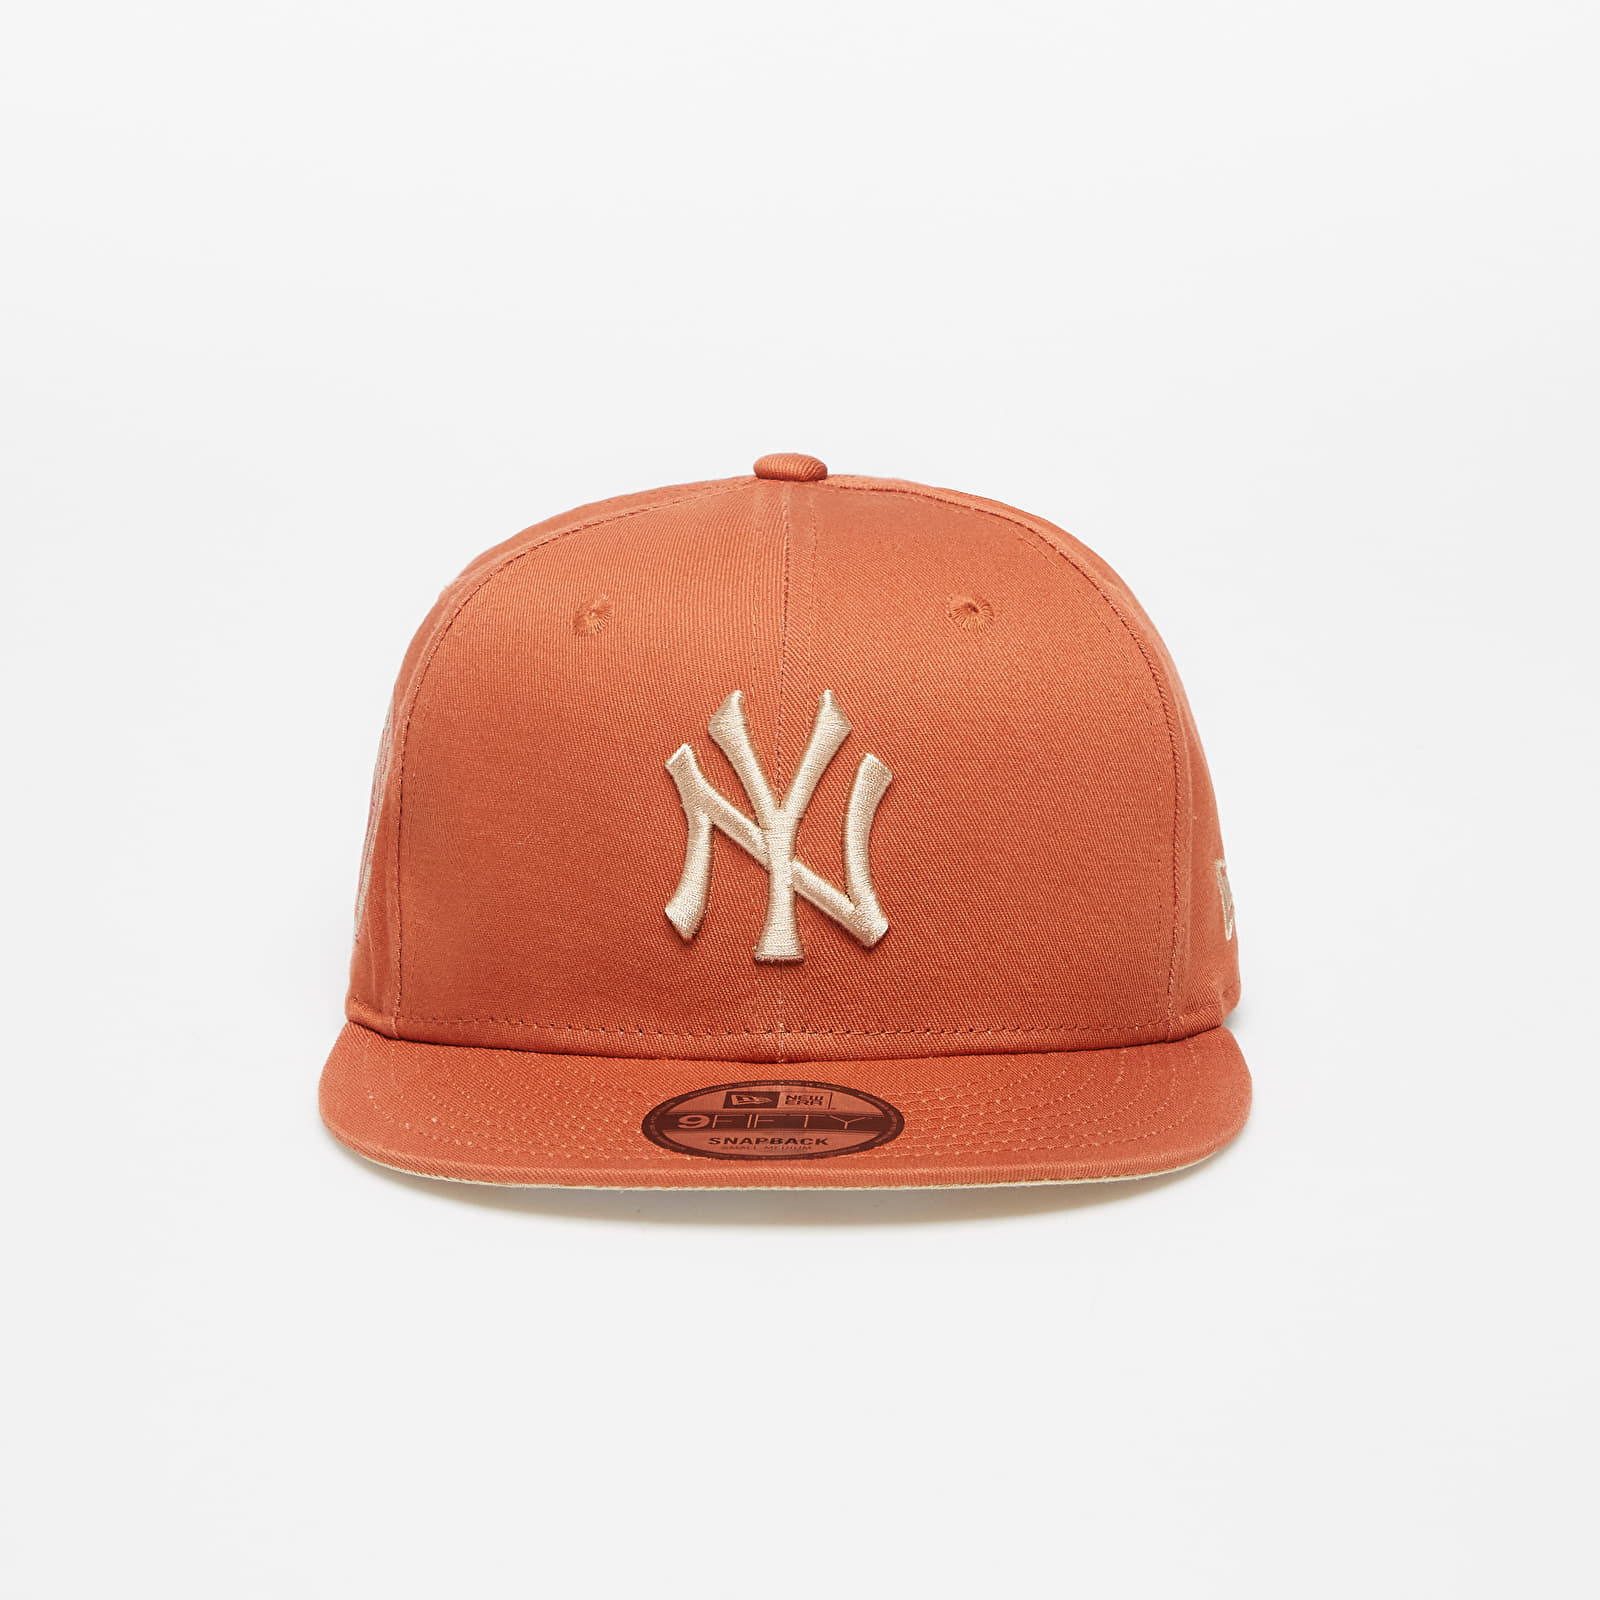 Caps New Era New York Yankees Side Patch 9FIFTY Medium Brown